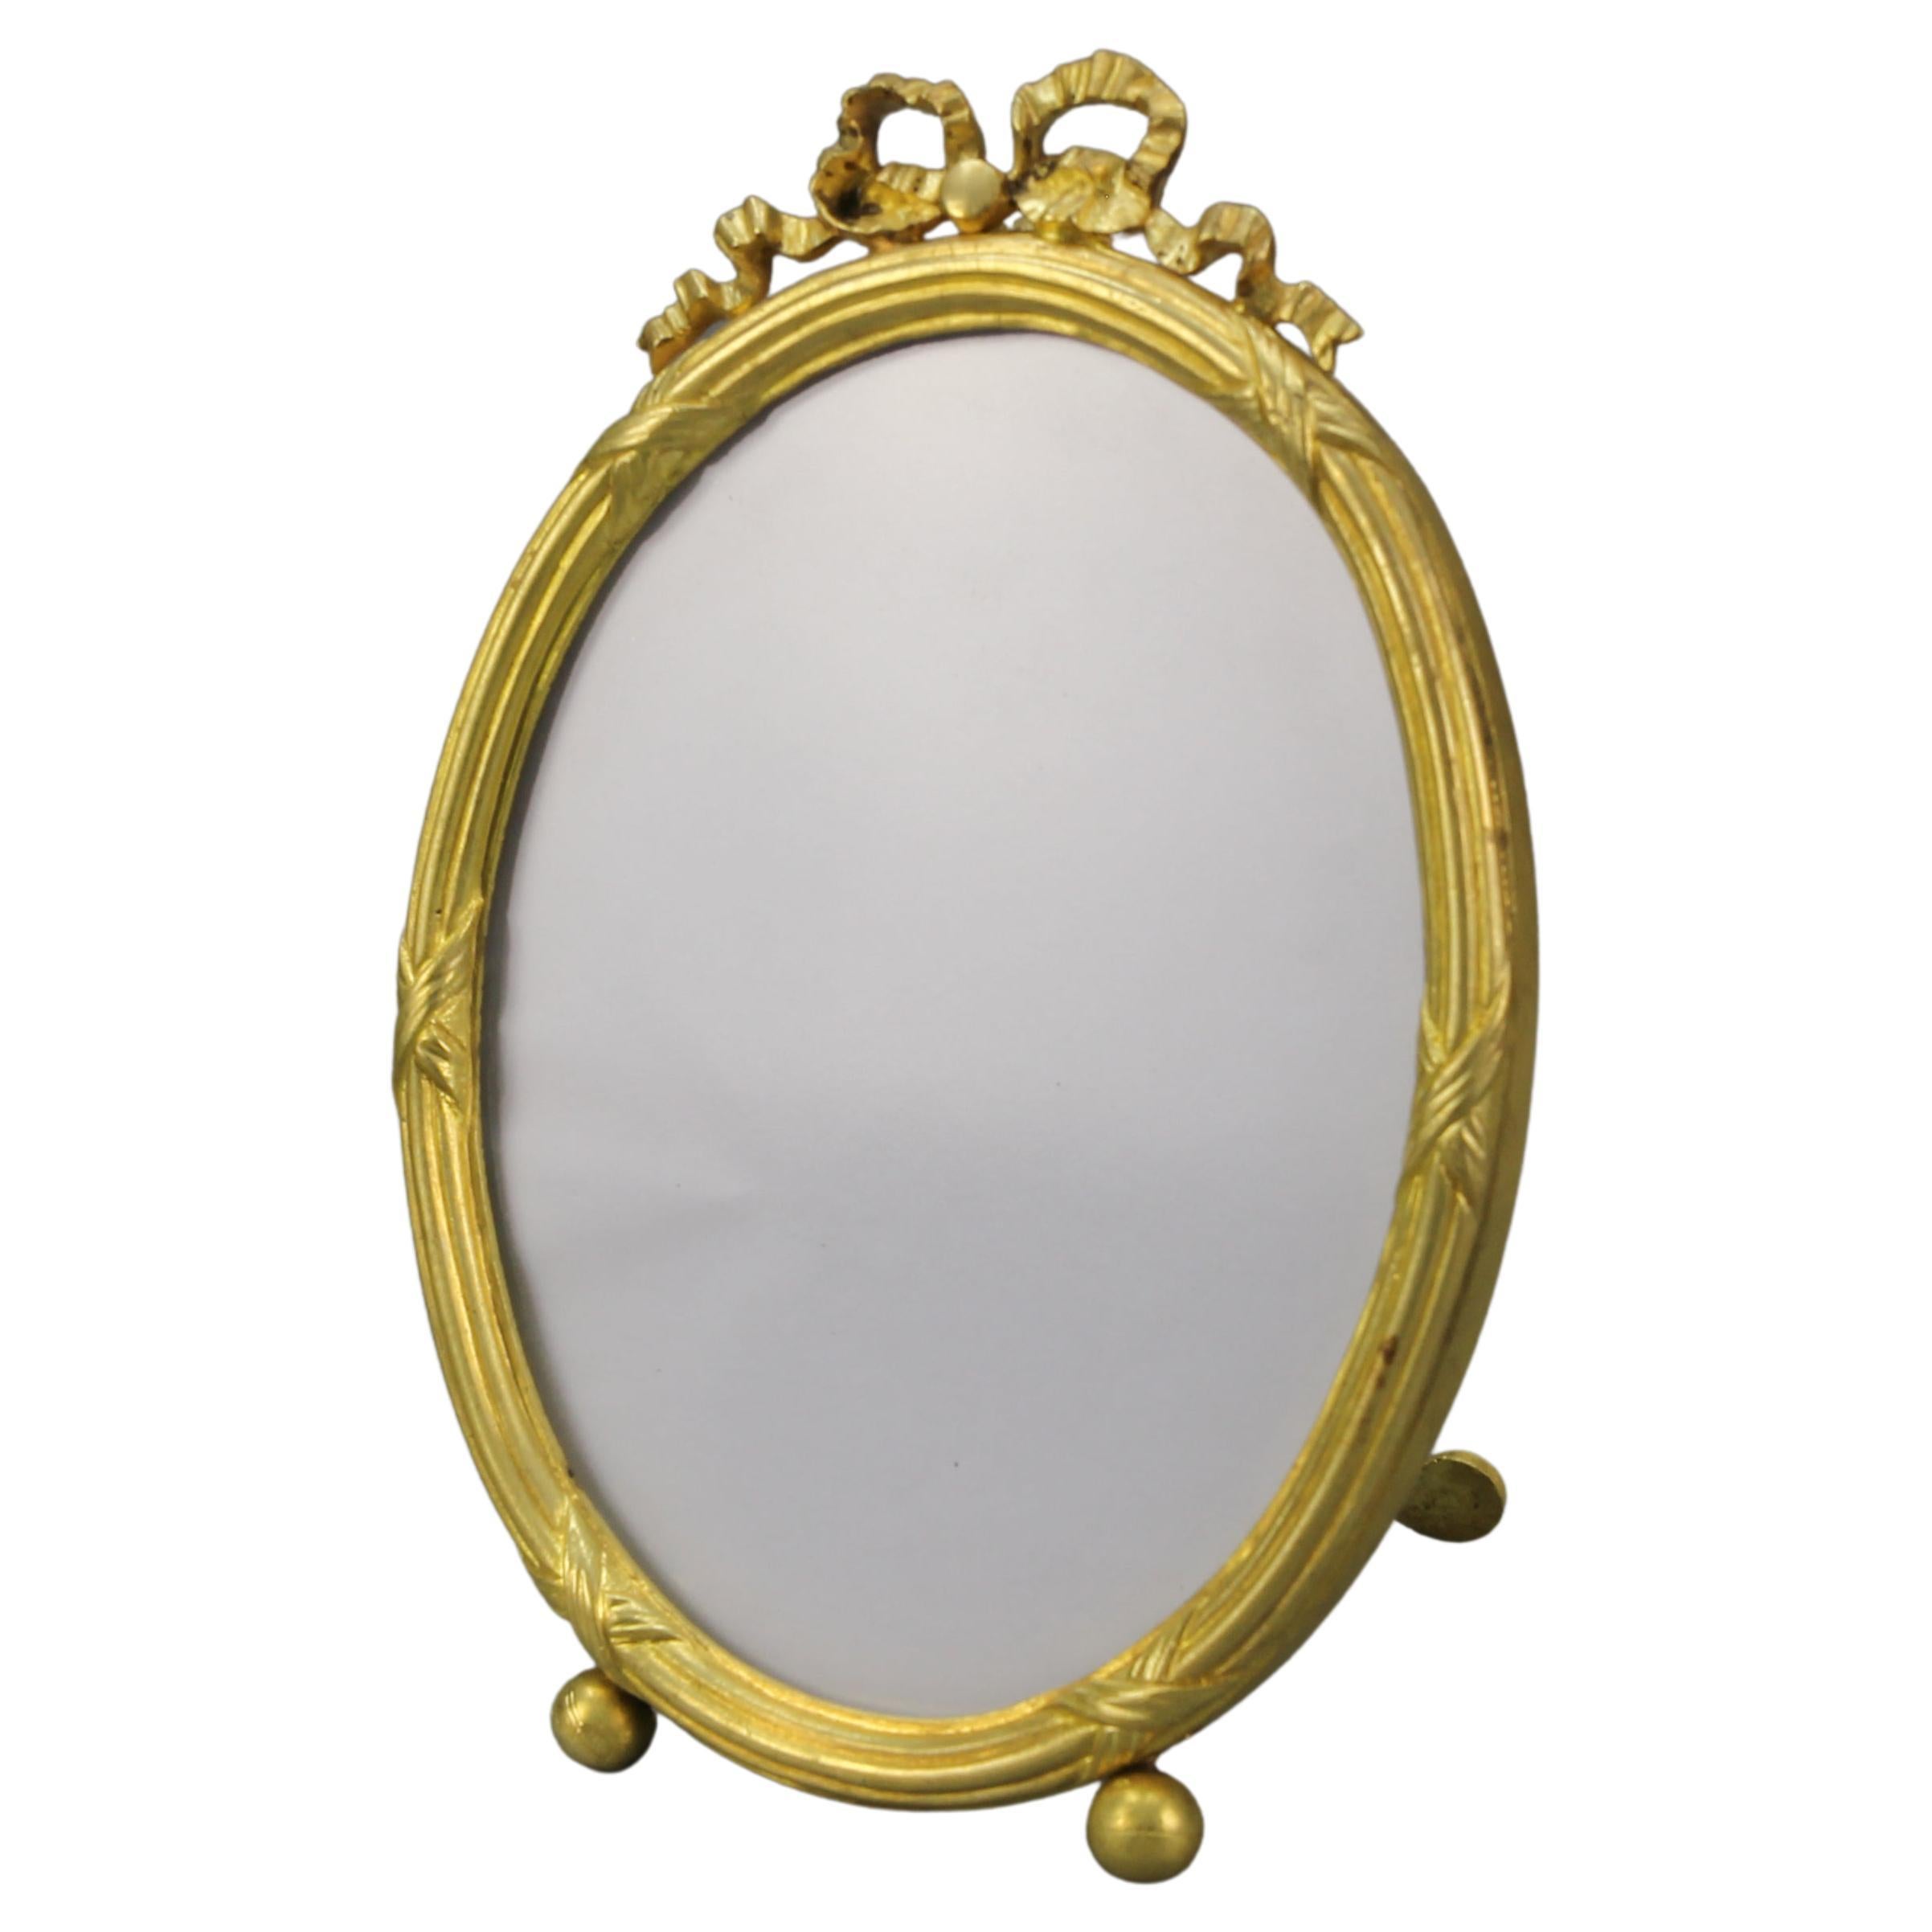 Early 20th Century French Louis XVI Style Bronze Oval Desktop Picture Frame For Sale